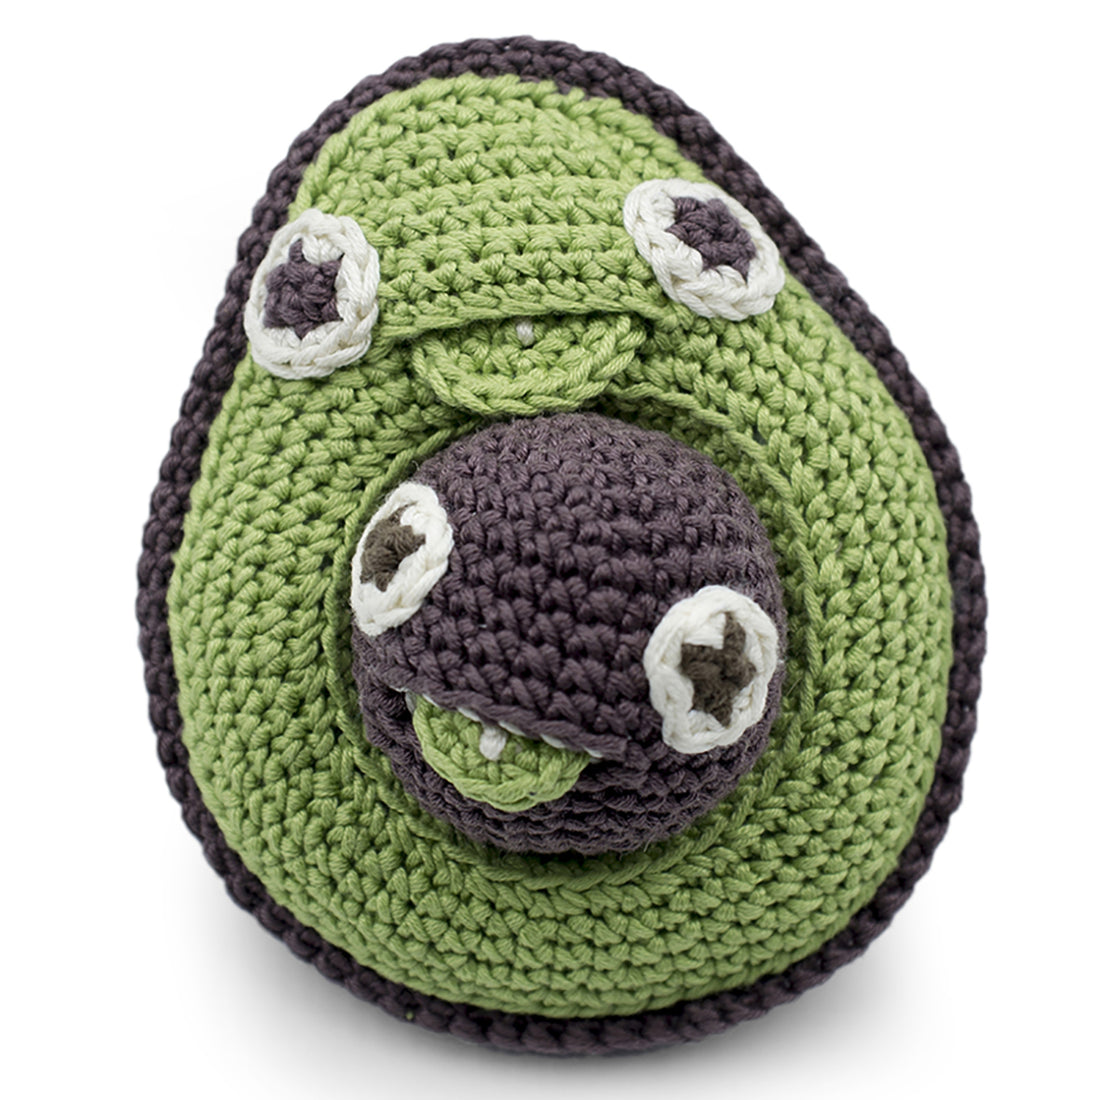 myum-mommy-avocado-and-her-baby-stone-rattle- (3)